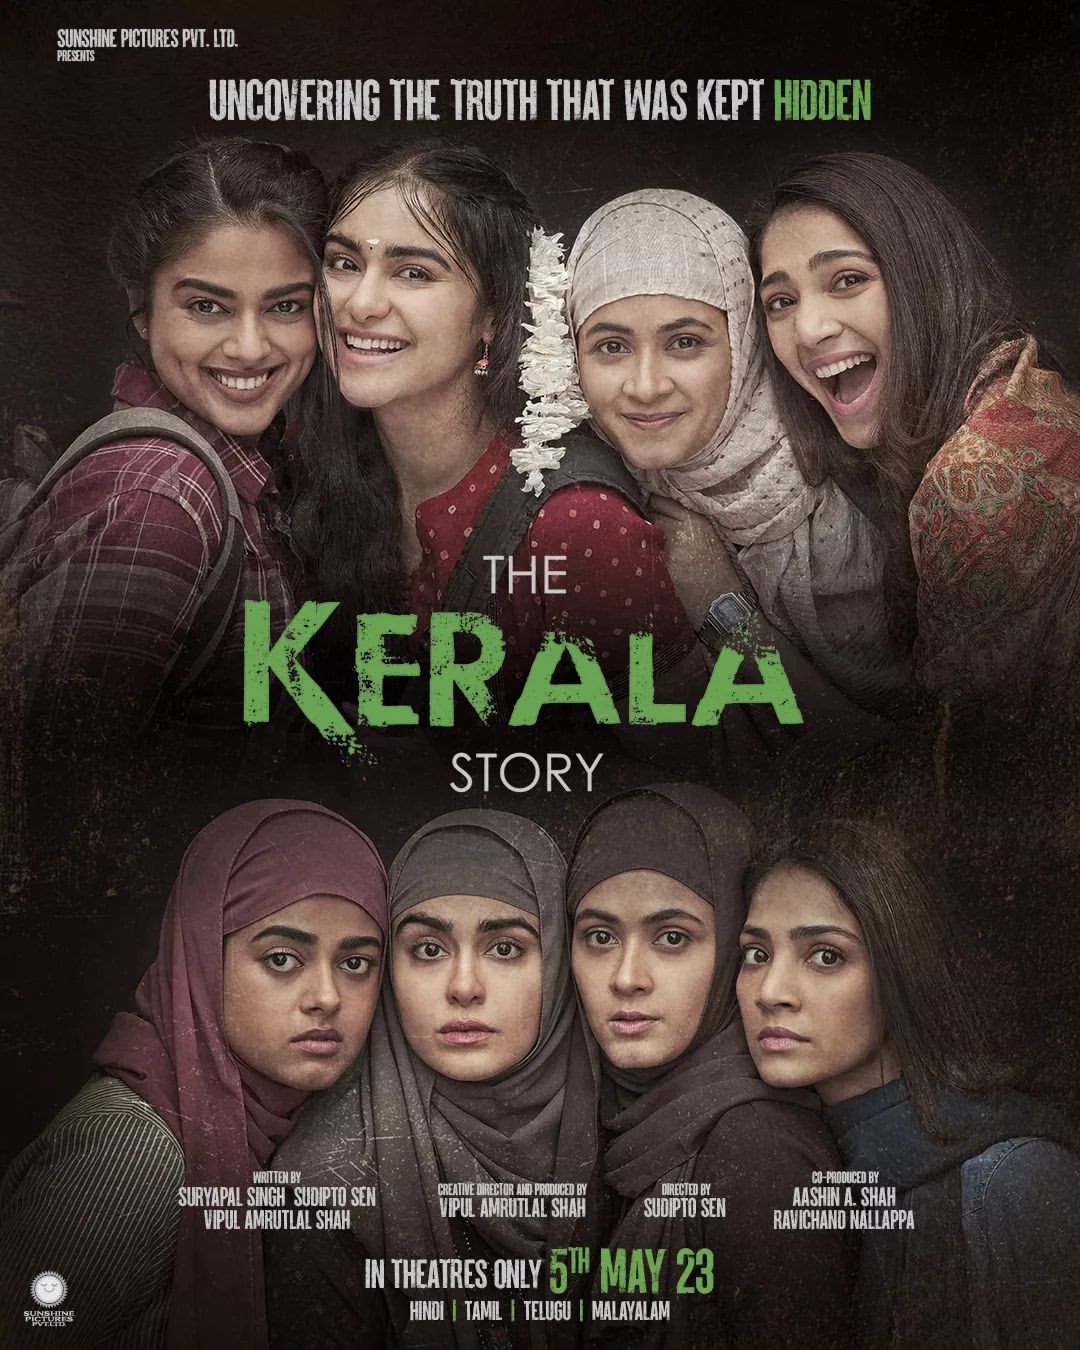 The Kerala Story Movie (2023) Cast, Release Date, Story, Budget, Collection, Poster, Trailer, Review